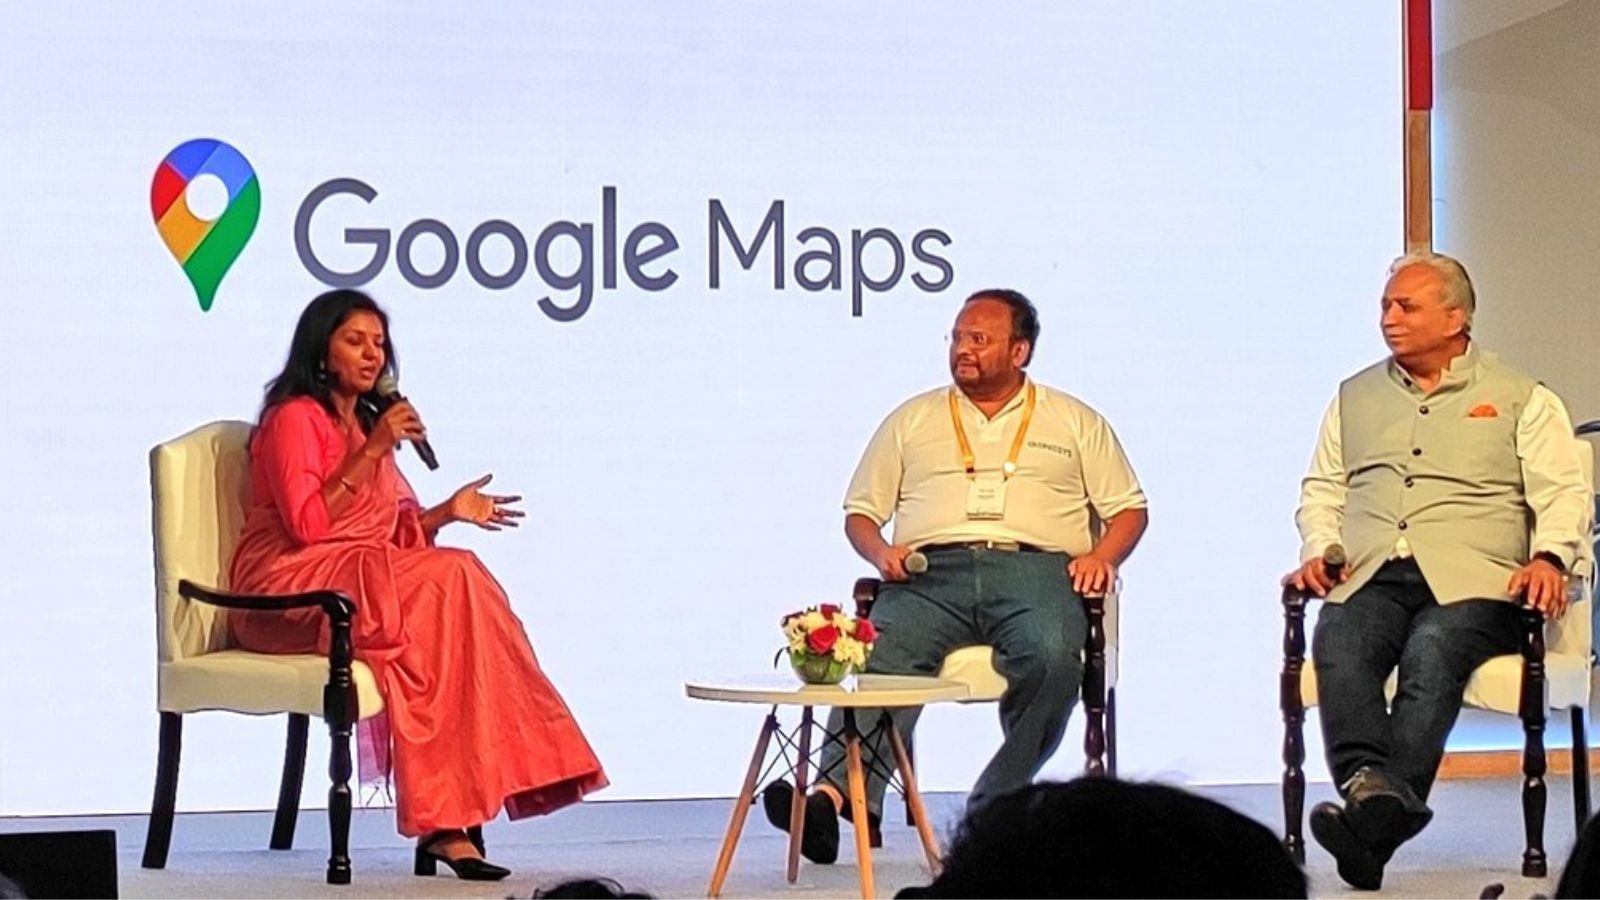 AGI Members Google India, Genesys International, and Tech Mahindra have partnered for India Street View Feature